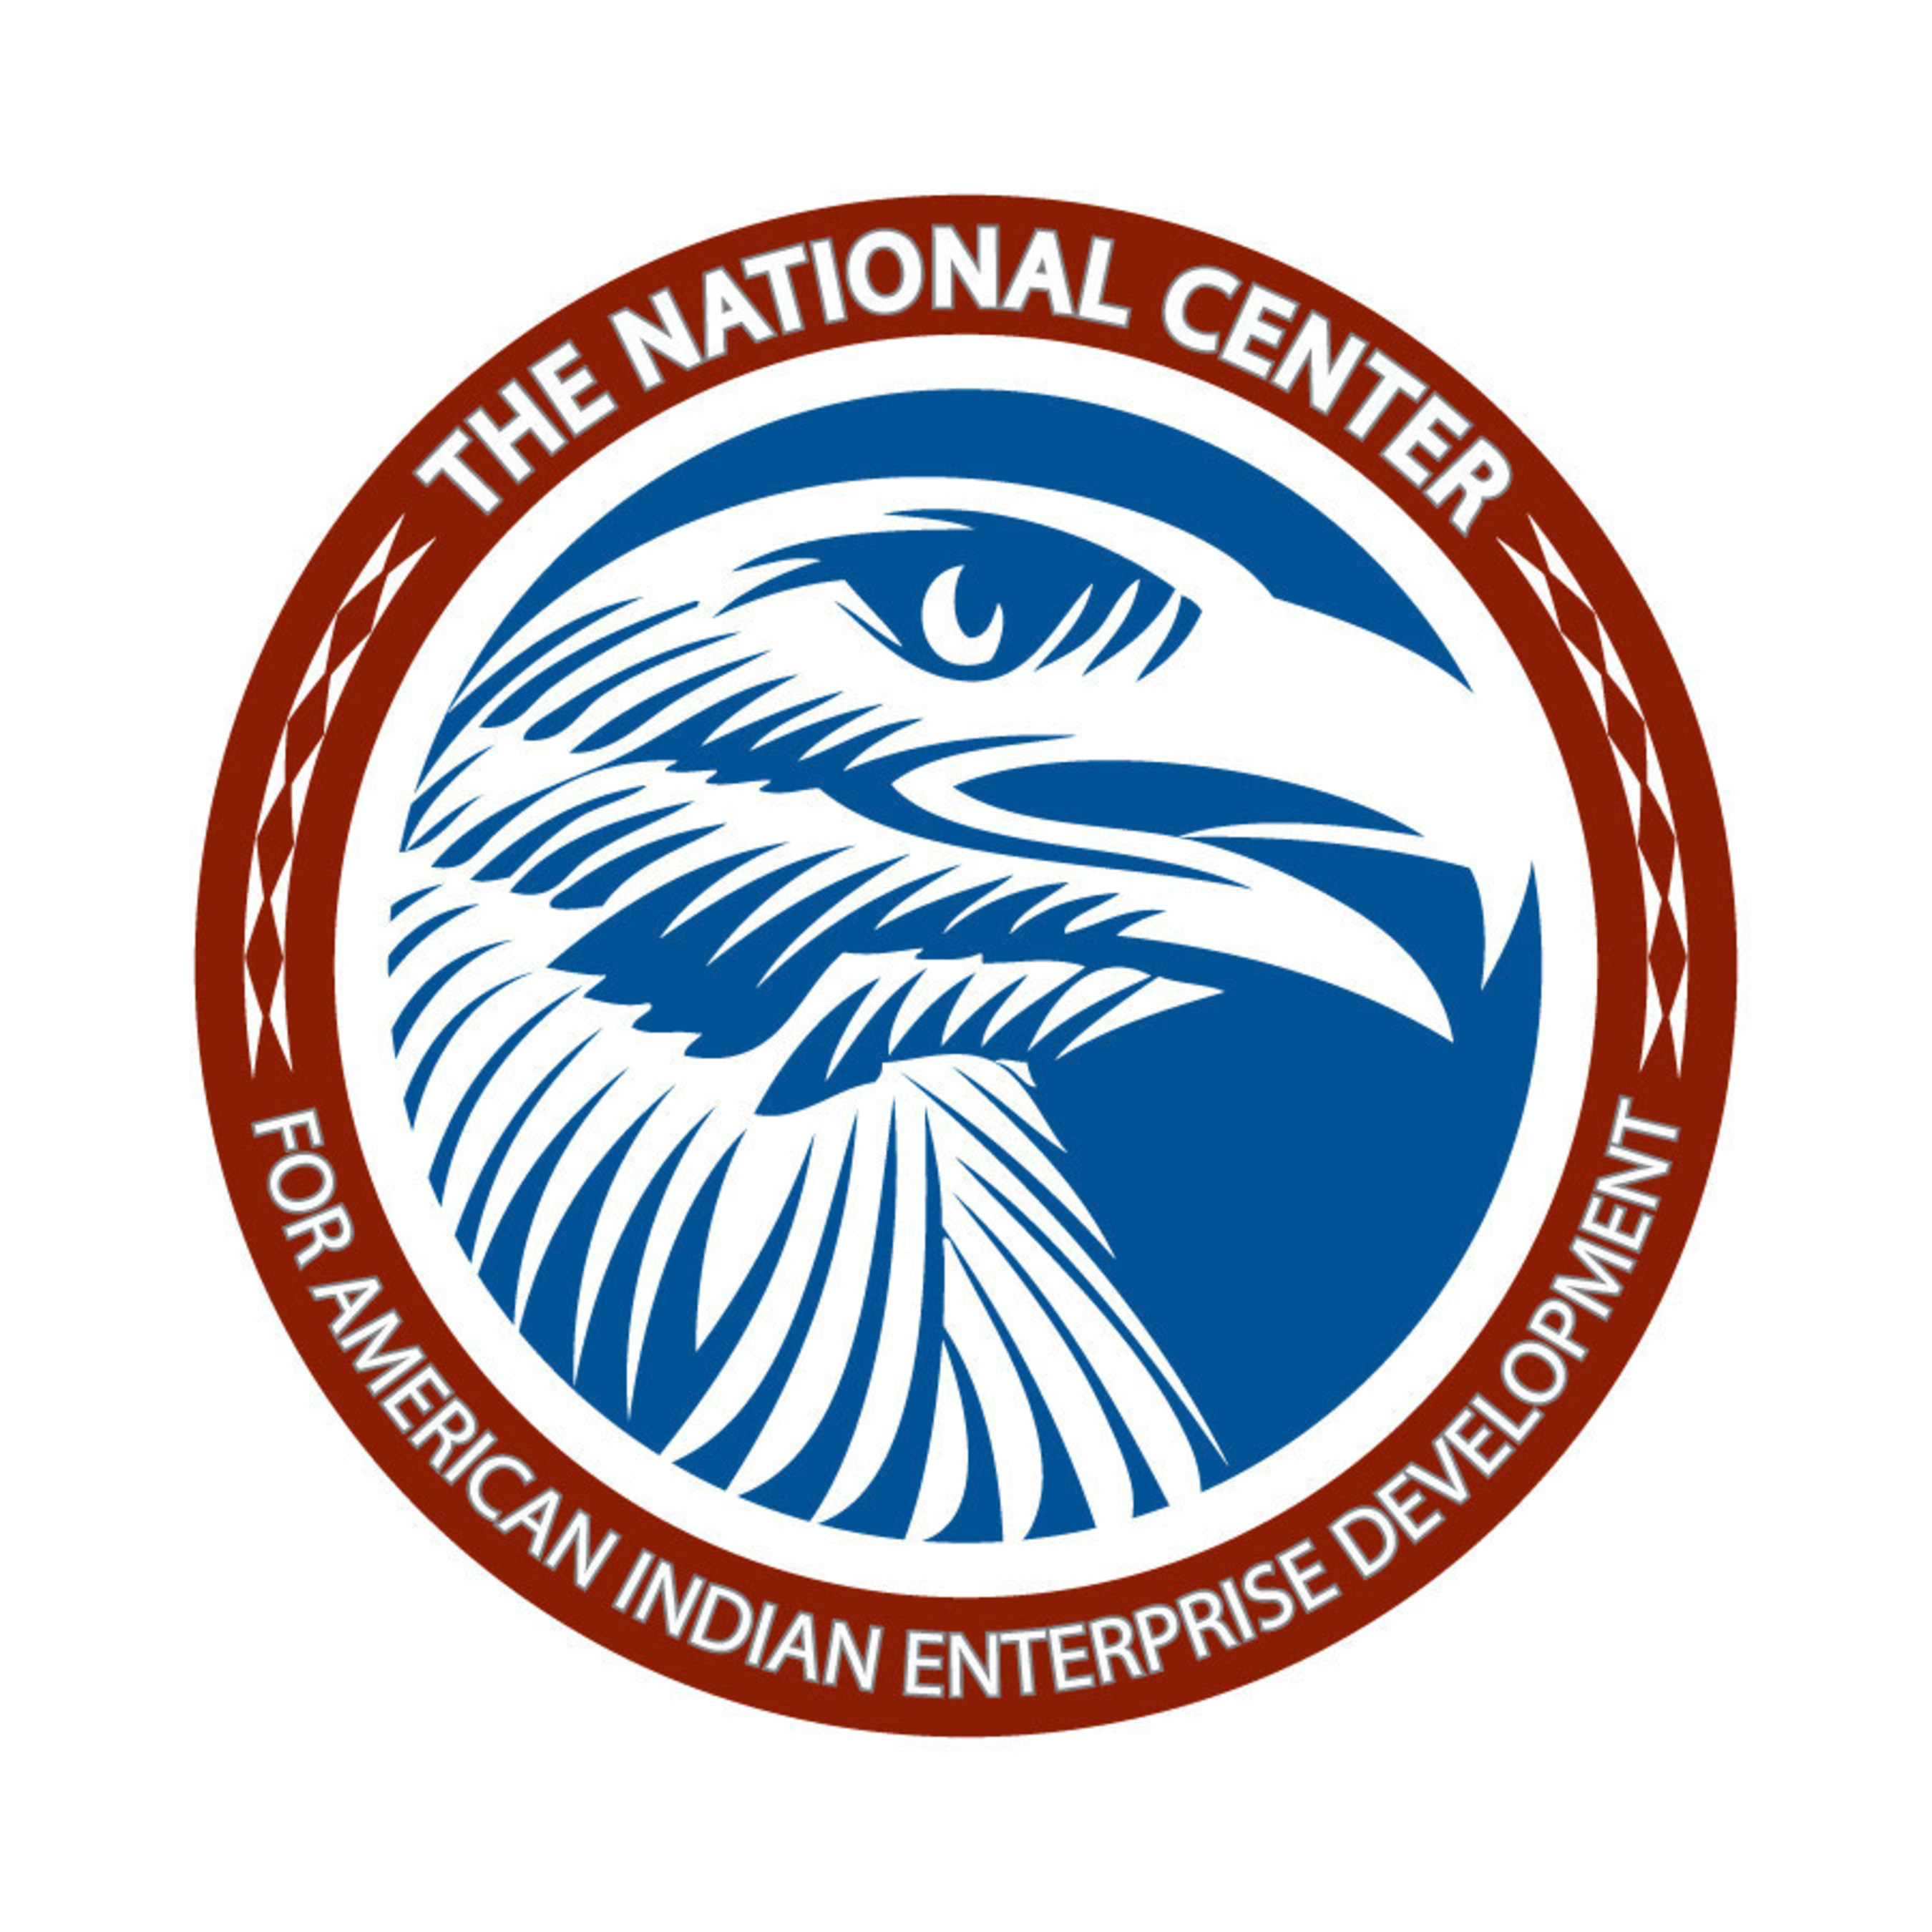 The National Center for American Indian Enterprise Development will host its National Reservation Economic Summit from March 9th - 12th in Las Vegas